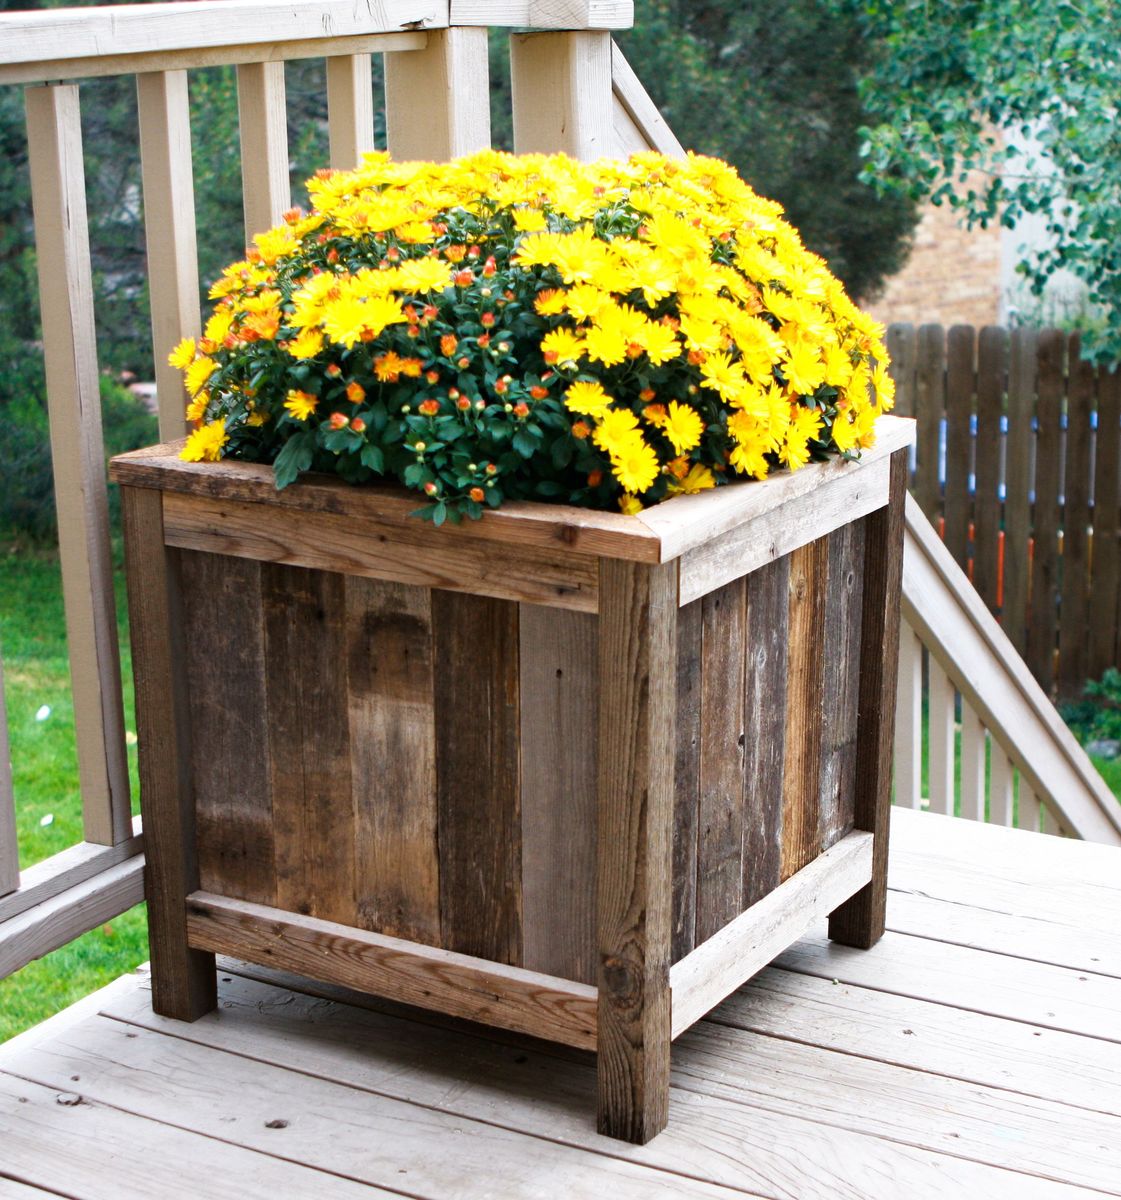 beautiful reclaimed wood planter box made by a reader with yellow flowers